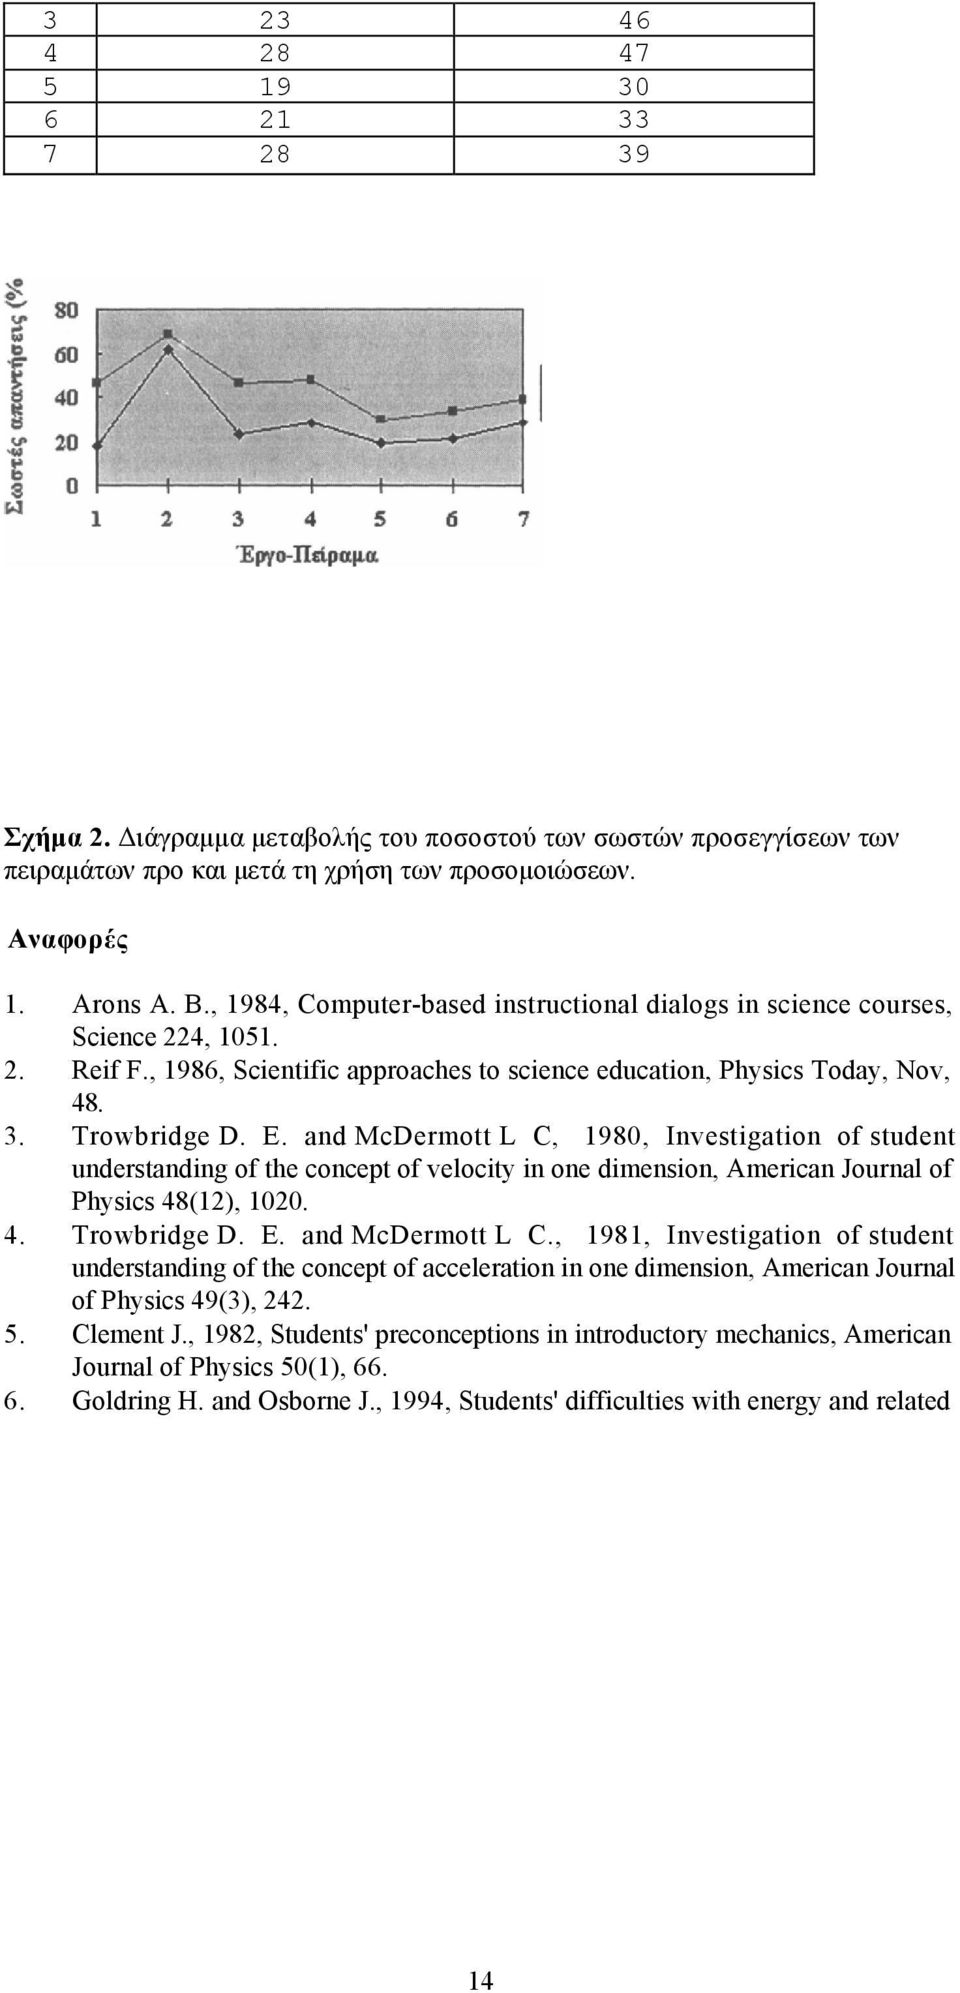 and McDermott L C, 1980, Investigation of student understanding of the concept of velocity in one dimension, American Journal of Physics 48(12), 1020. 4. Trowbridge D. E. and McDermott L C.